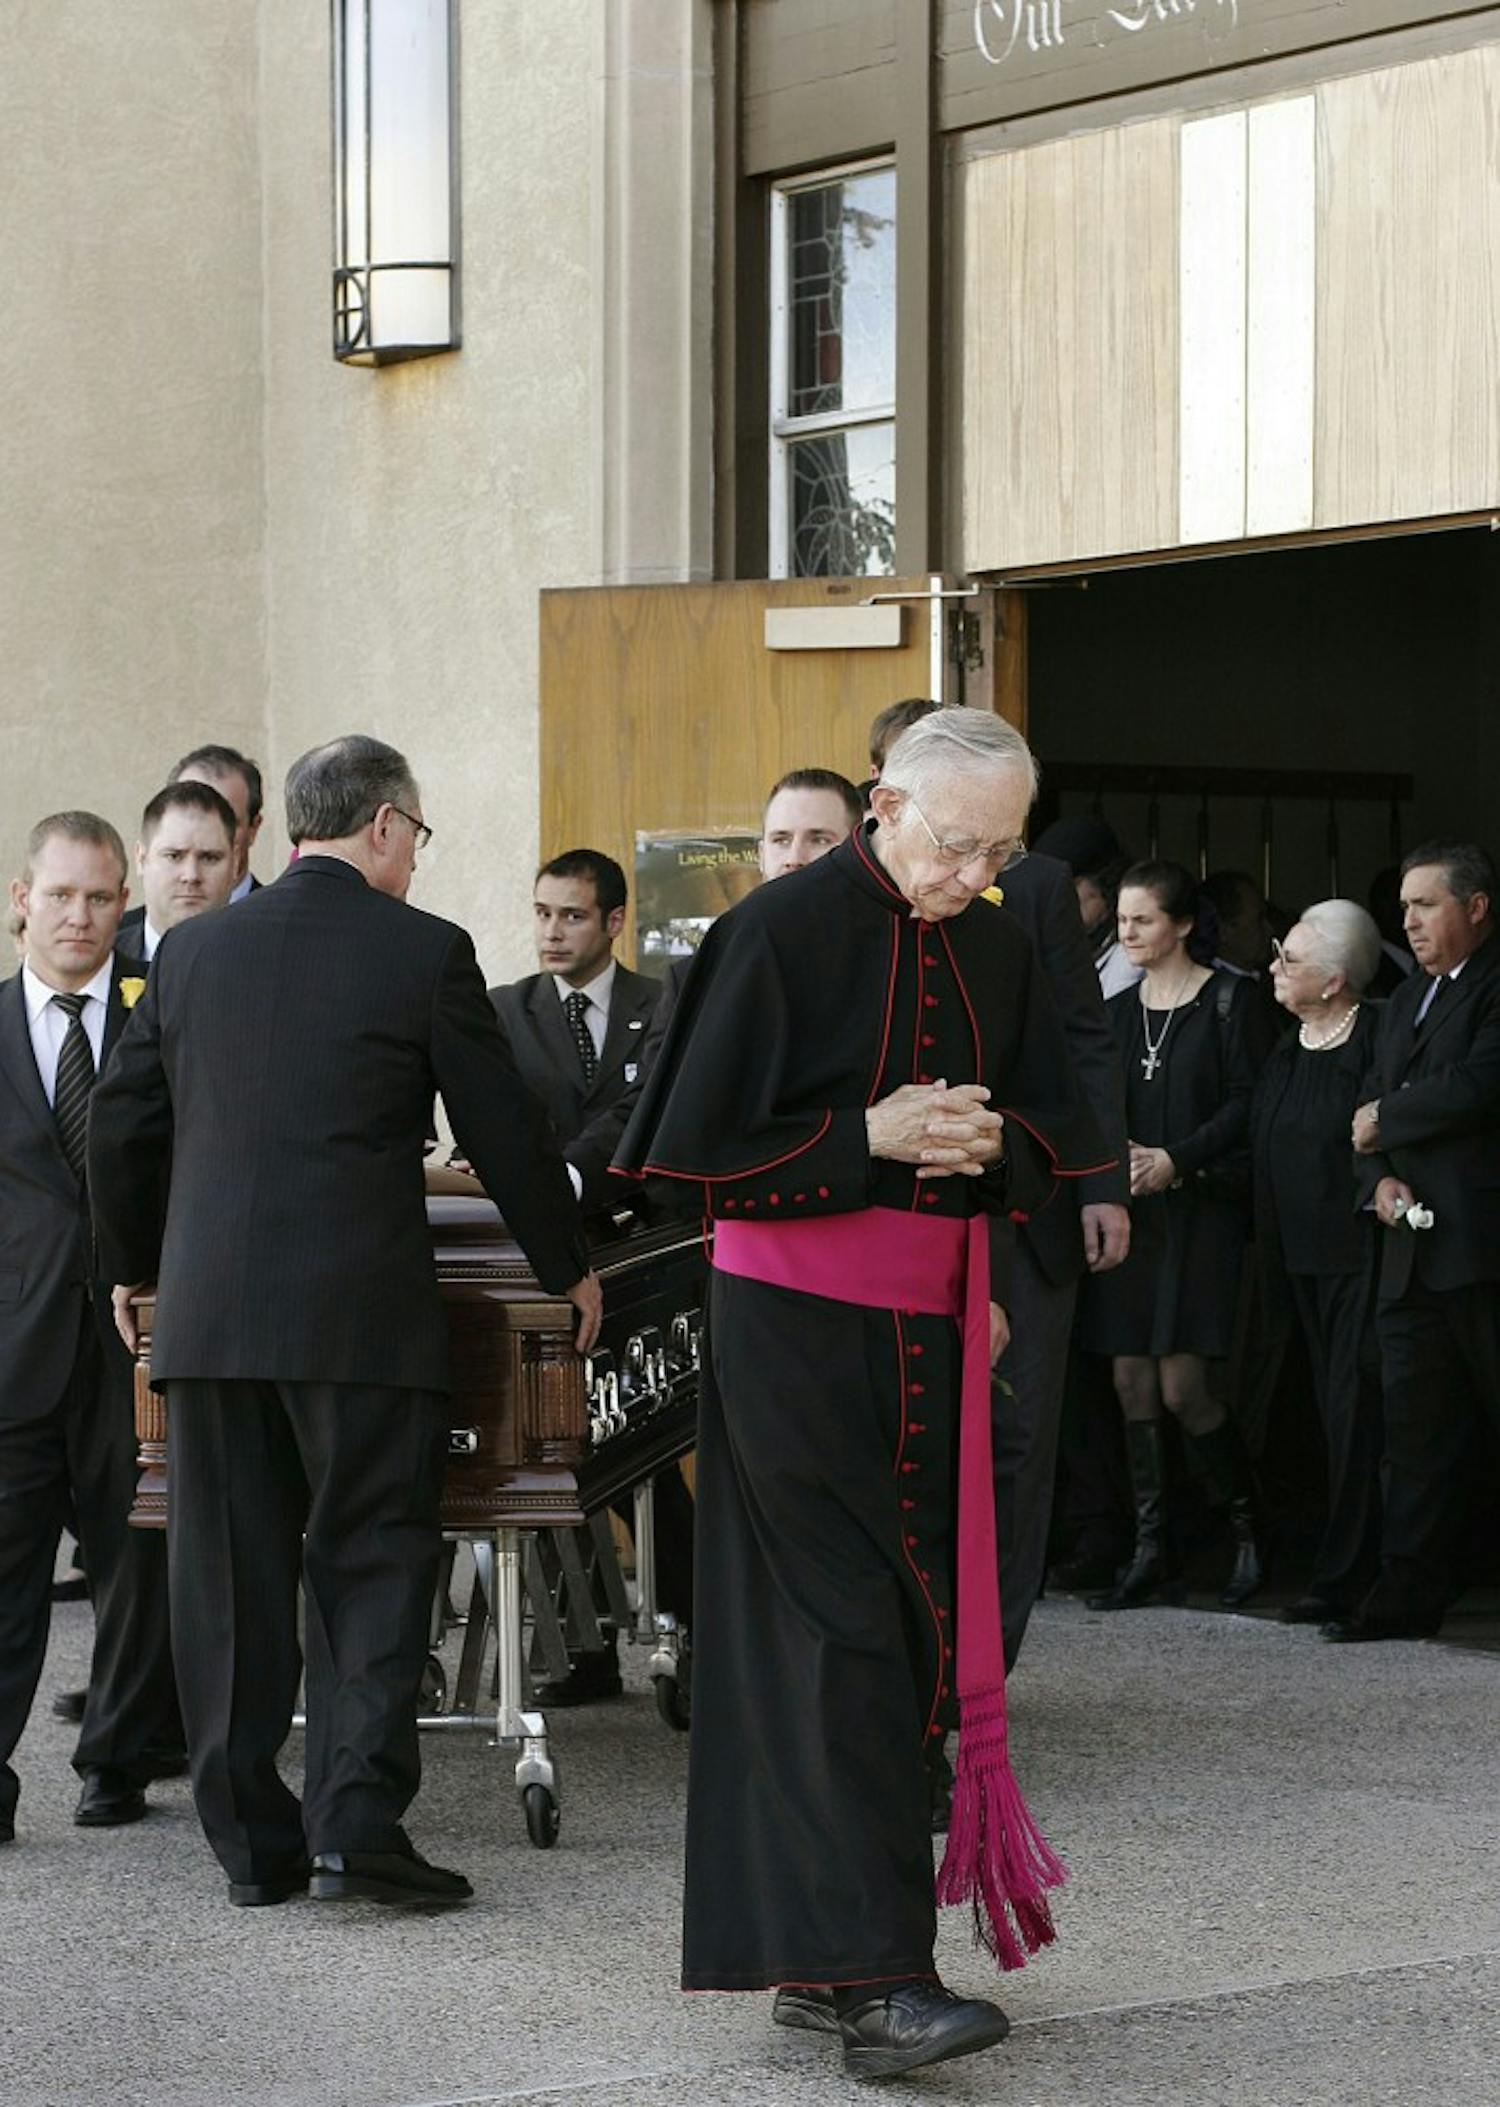 	Monsignor Francis X. Eggert leads the procession carrying Justice Gene Franchini’s casket at Our Lady of Fatima Catholic Church on Saturday. Franchini died Wednesday evening while giving a speech to first-year law students on north campus. Over 500 people attended Franchini’s funeral, including Board of Regents President Raymond Sanchez, a long-time friend.